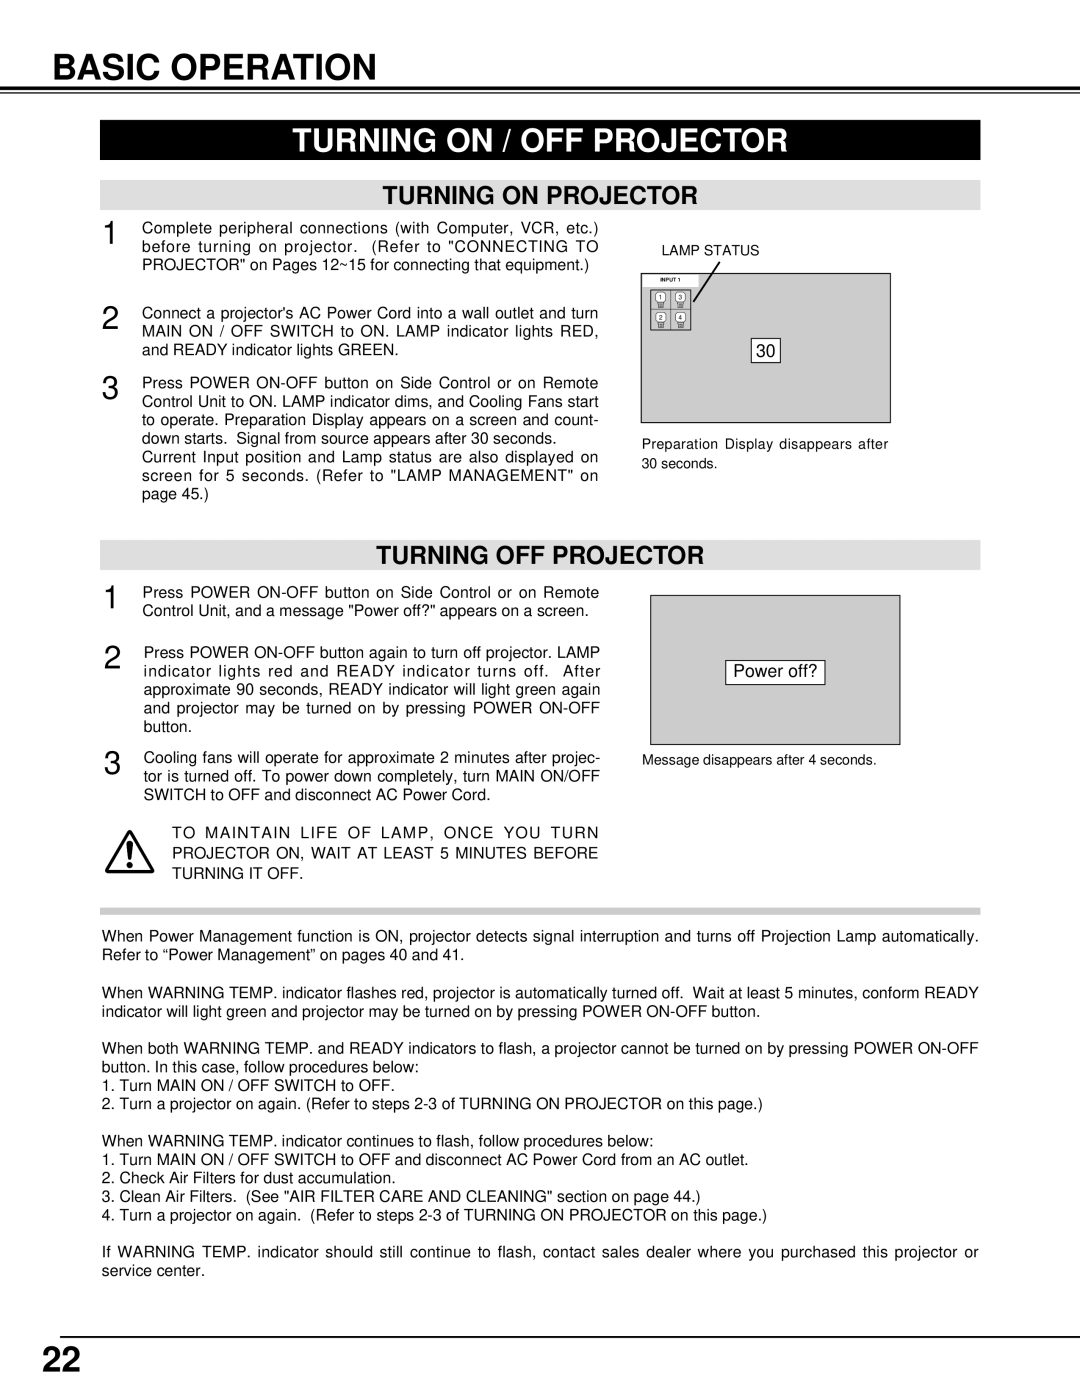 Eiki LC-XT3 instruction manual Basic Operation, Turning on / OFF Projector, Turning on Projector, Turning OFF Projector 